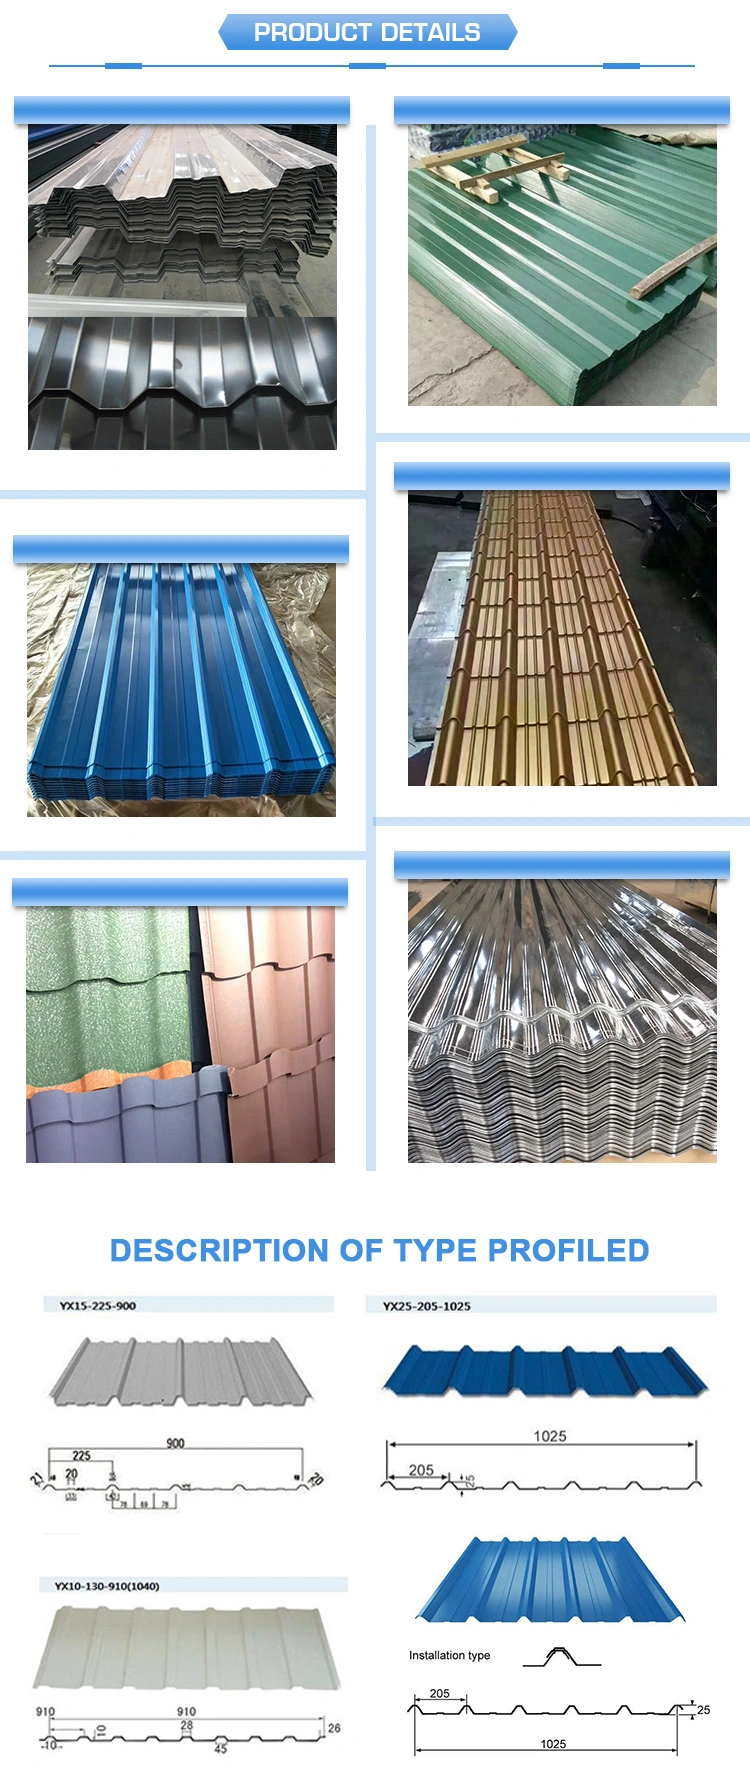 Cold Rolled PE HDP Pre-Painted Color Coated Galvanized Coil PPGI Galvalume Floor Deck Prepainted Galvanized Corrugated Sheet for Roofing Sheet